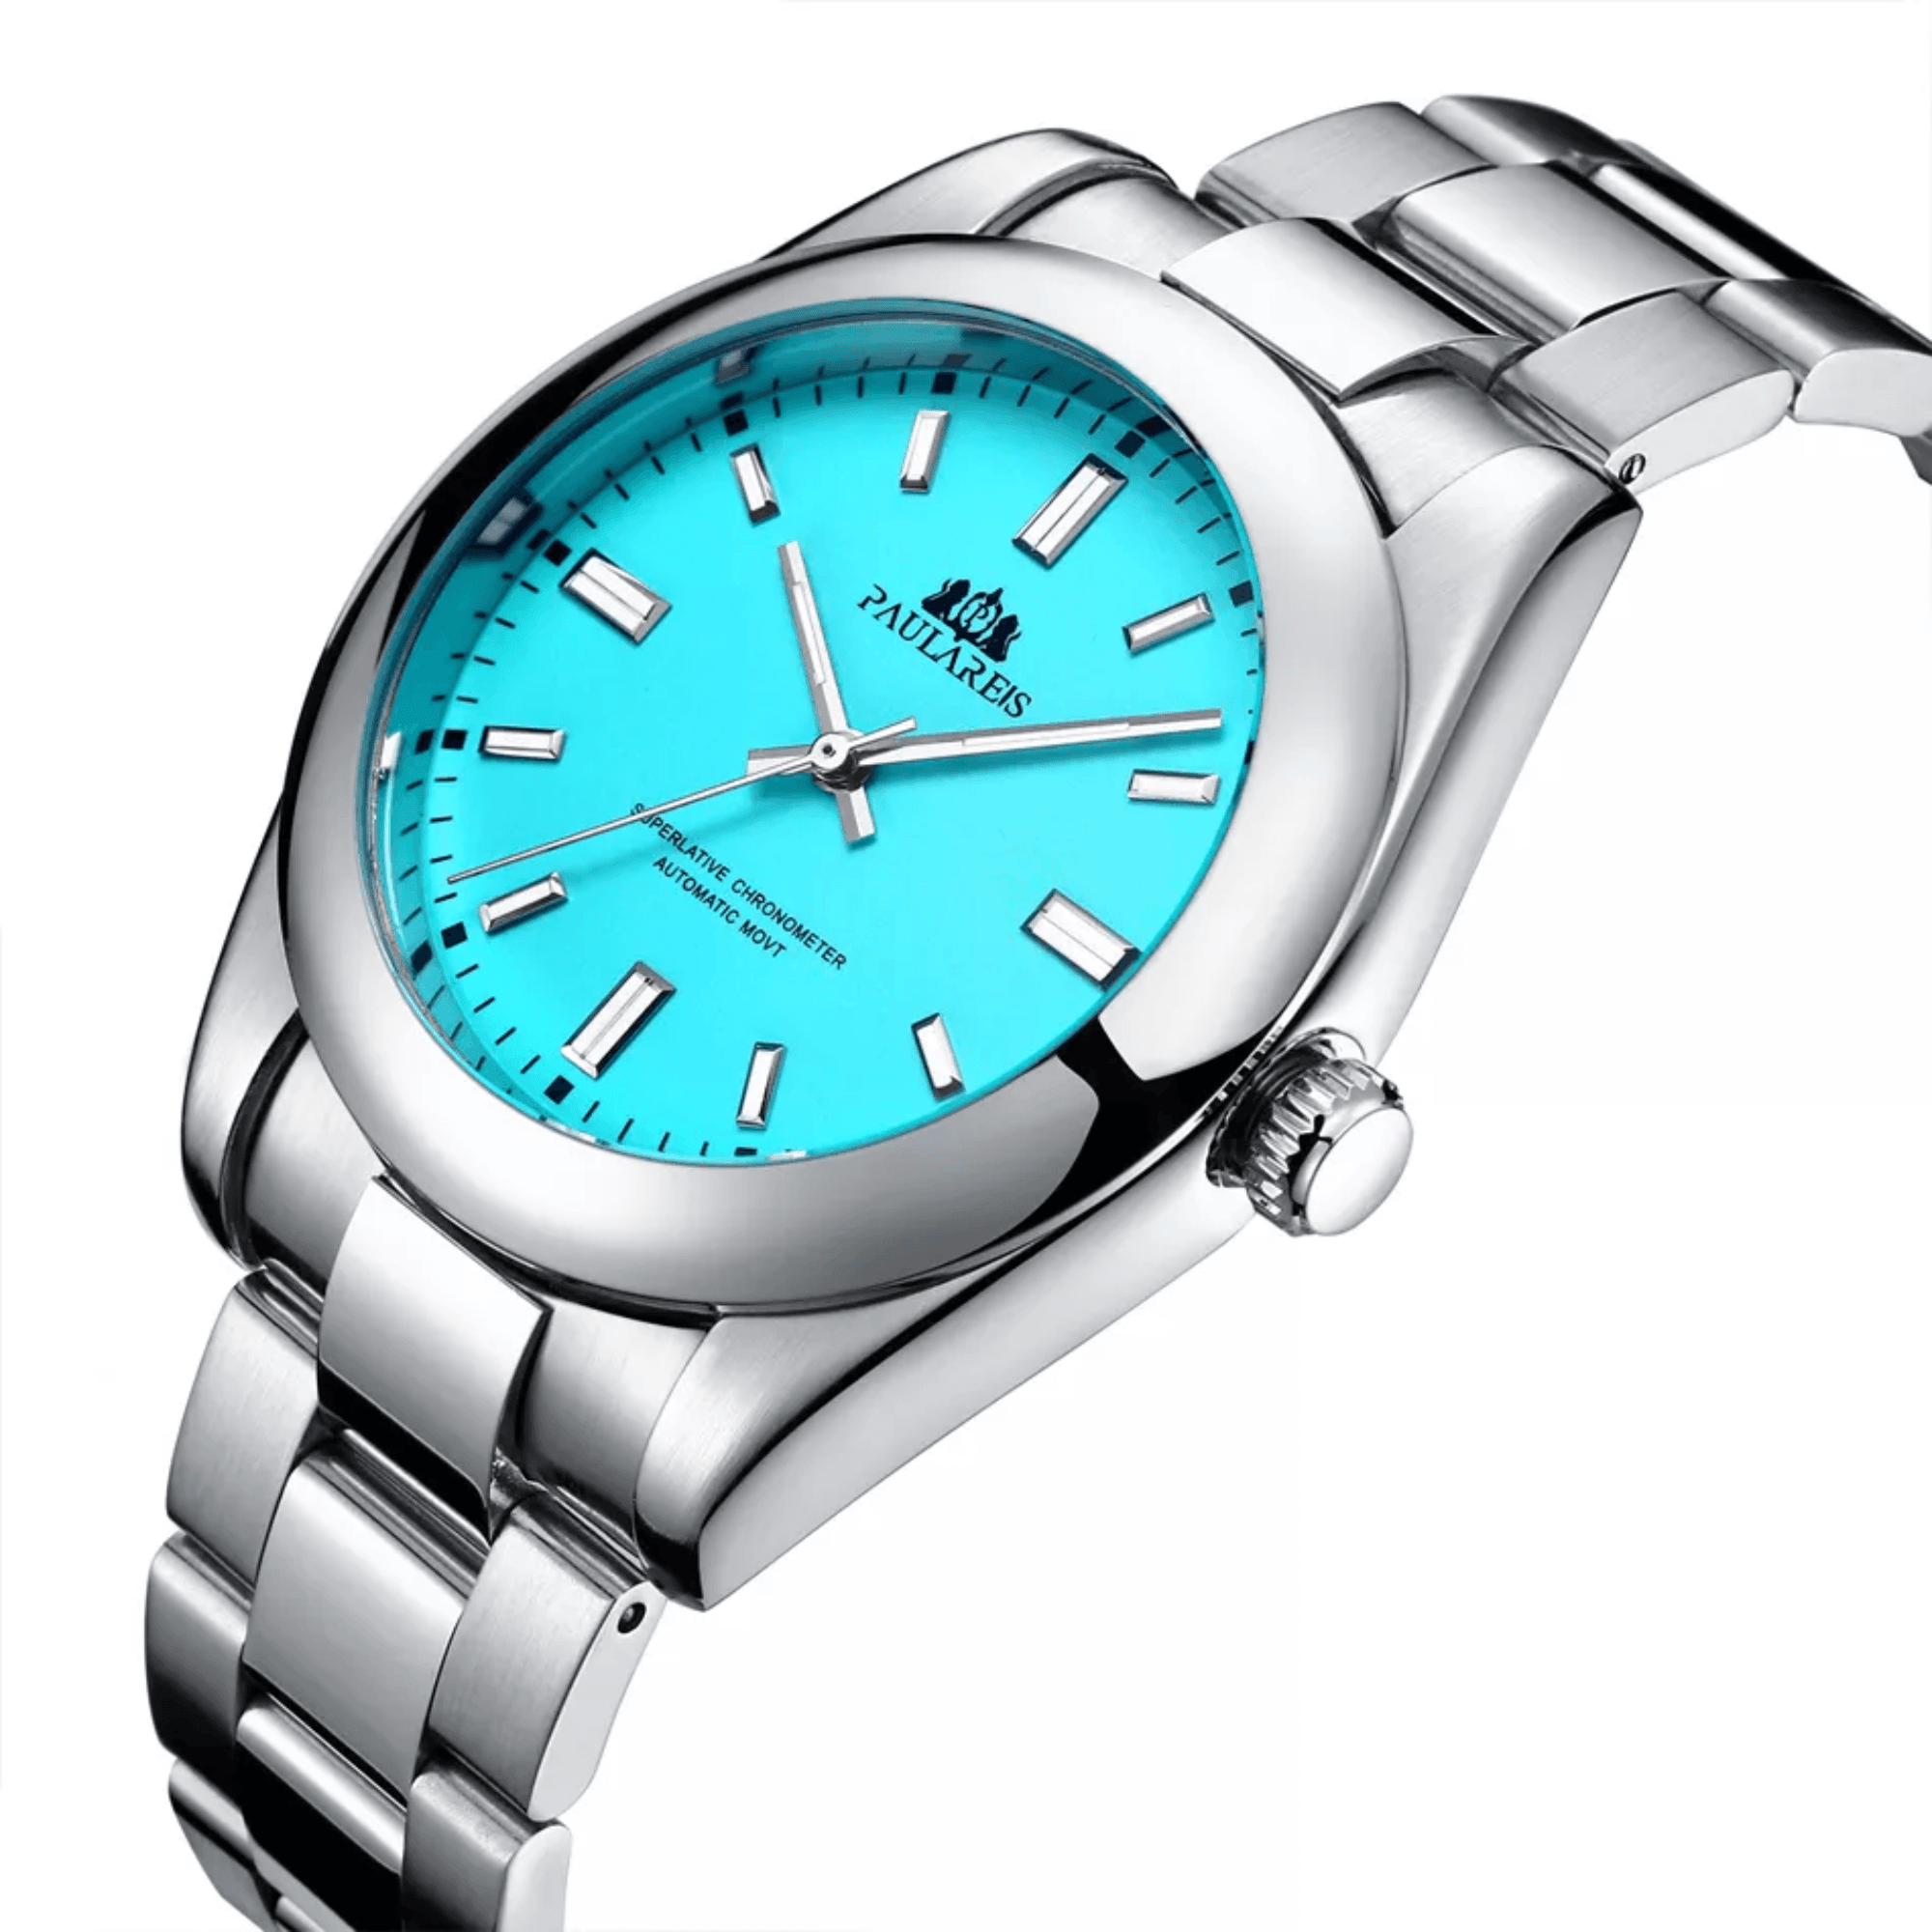 PAULAREIS Oyster Perpetual Homage Automatic Movement | Stainless Steel Dial Men's 40MM Watch | Tiffany Blue Dial Paularies watches india dream watches